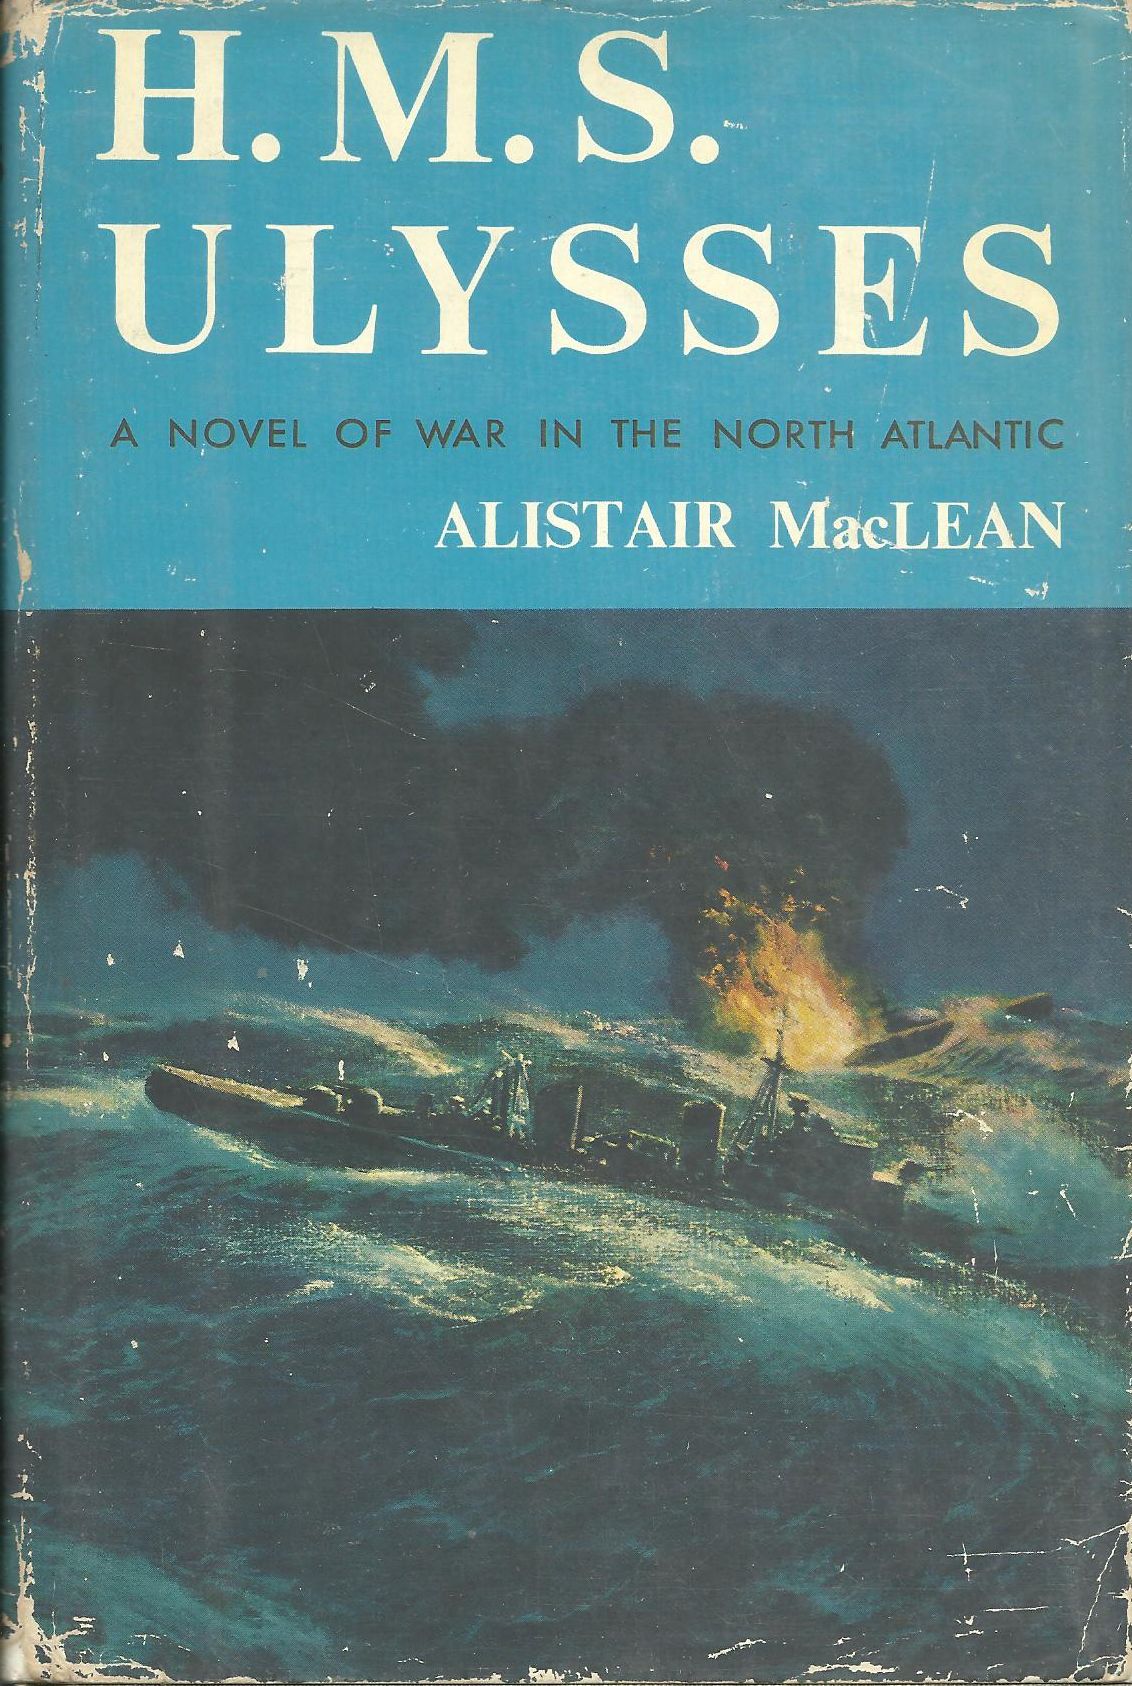 HMS Ulysses - US first edition